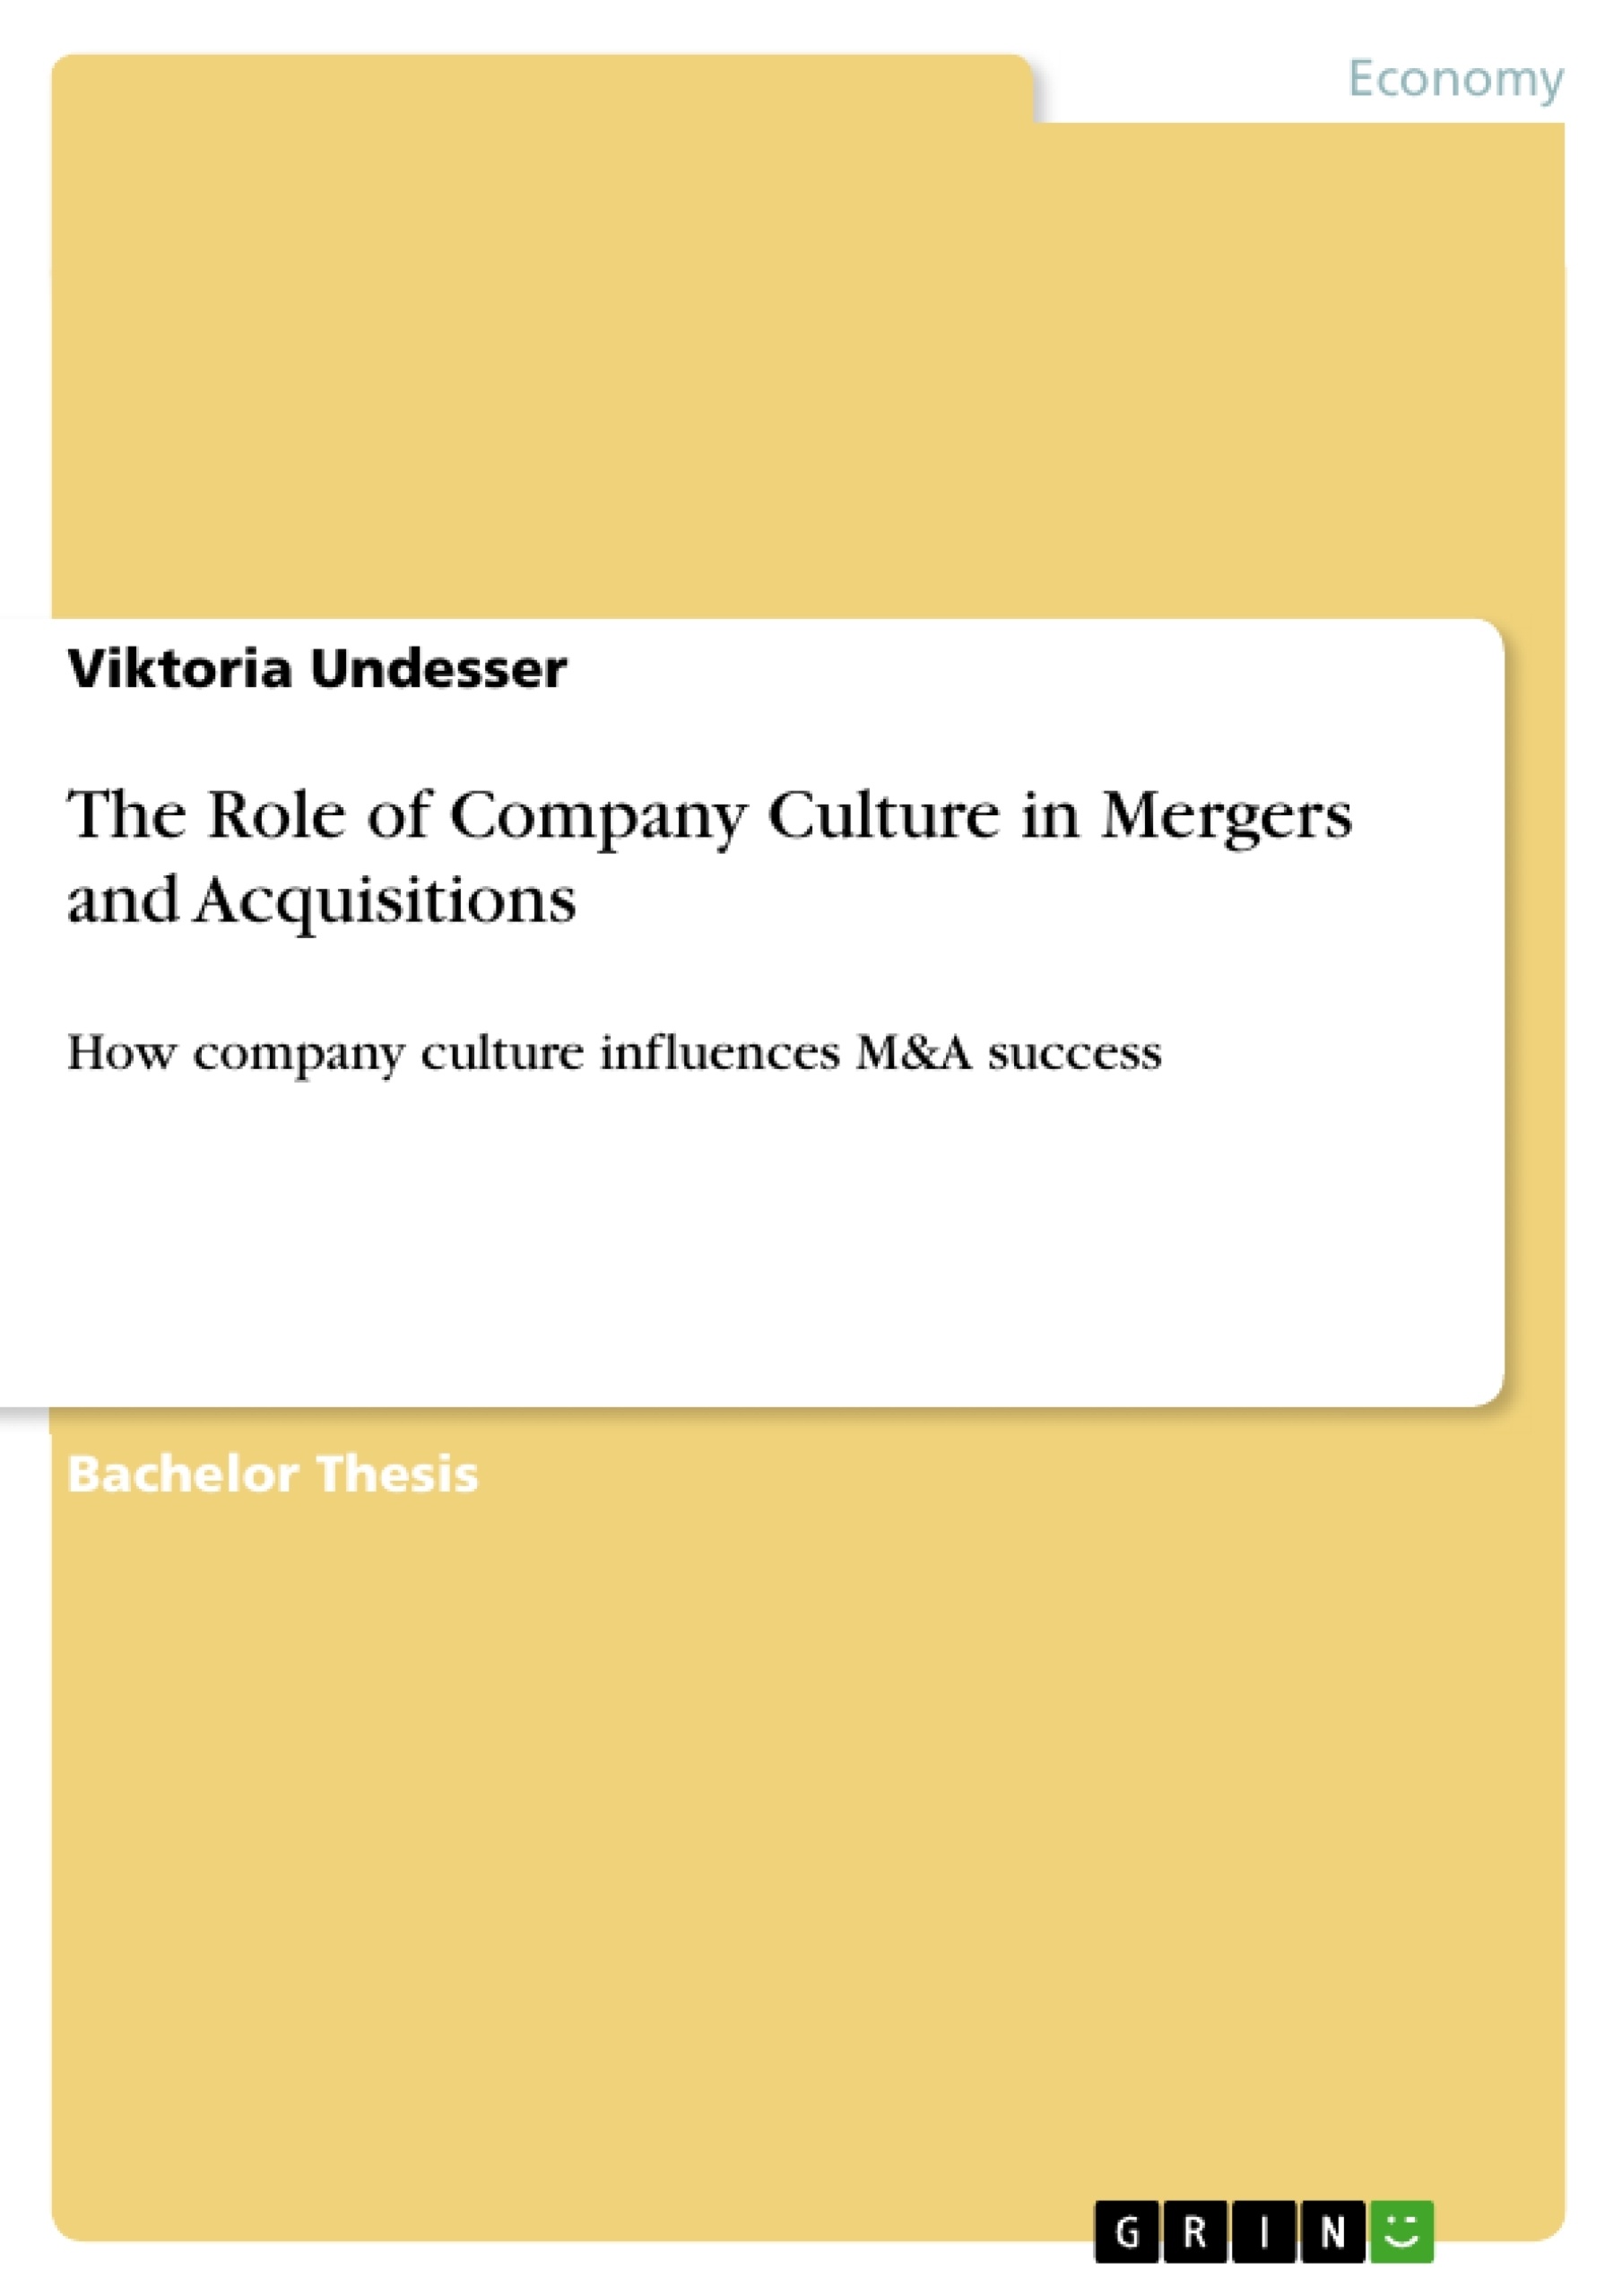 Title: The Role of Company Culture in Mergers and Acquisitions